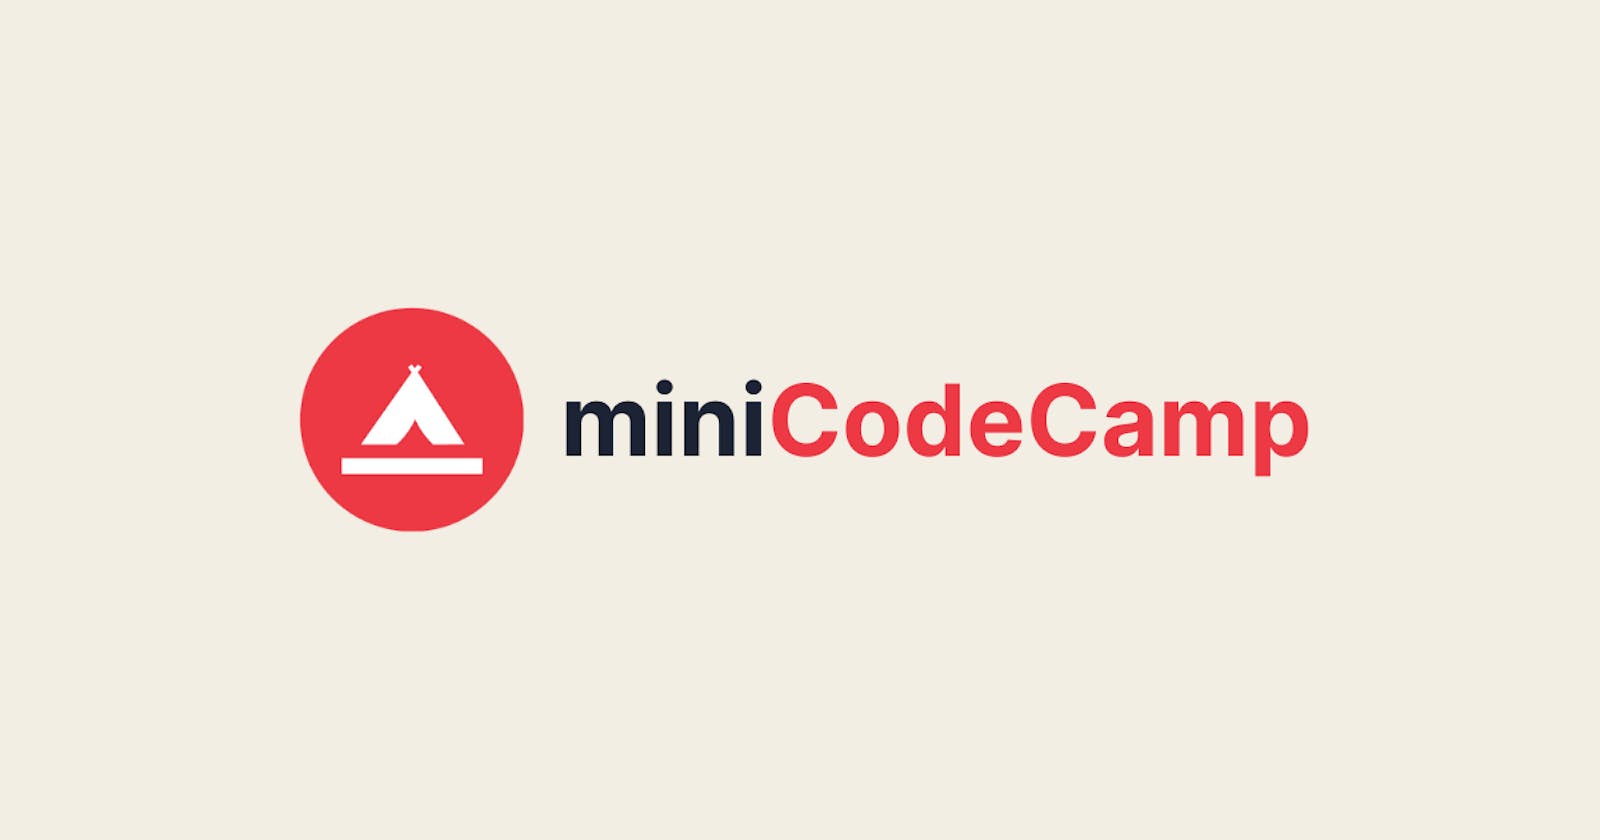 Introducing miniCodeCamp - A free online mini coding bootcamp